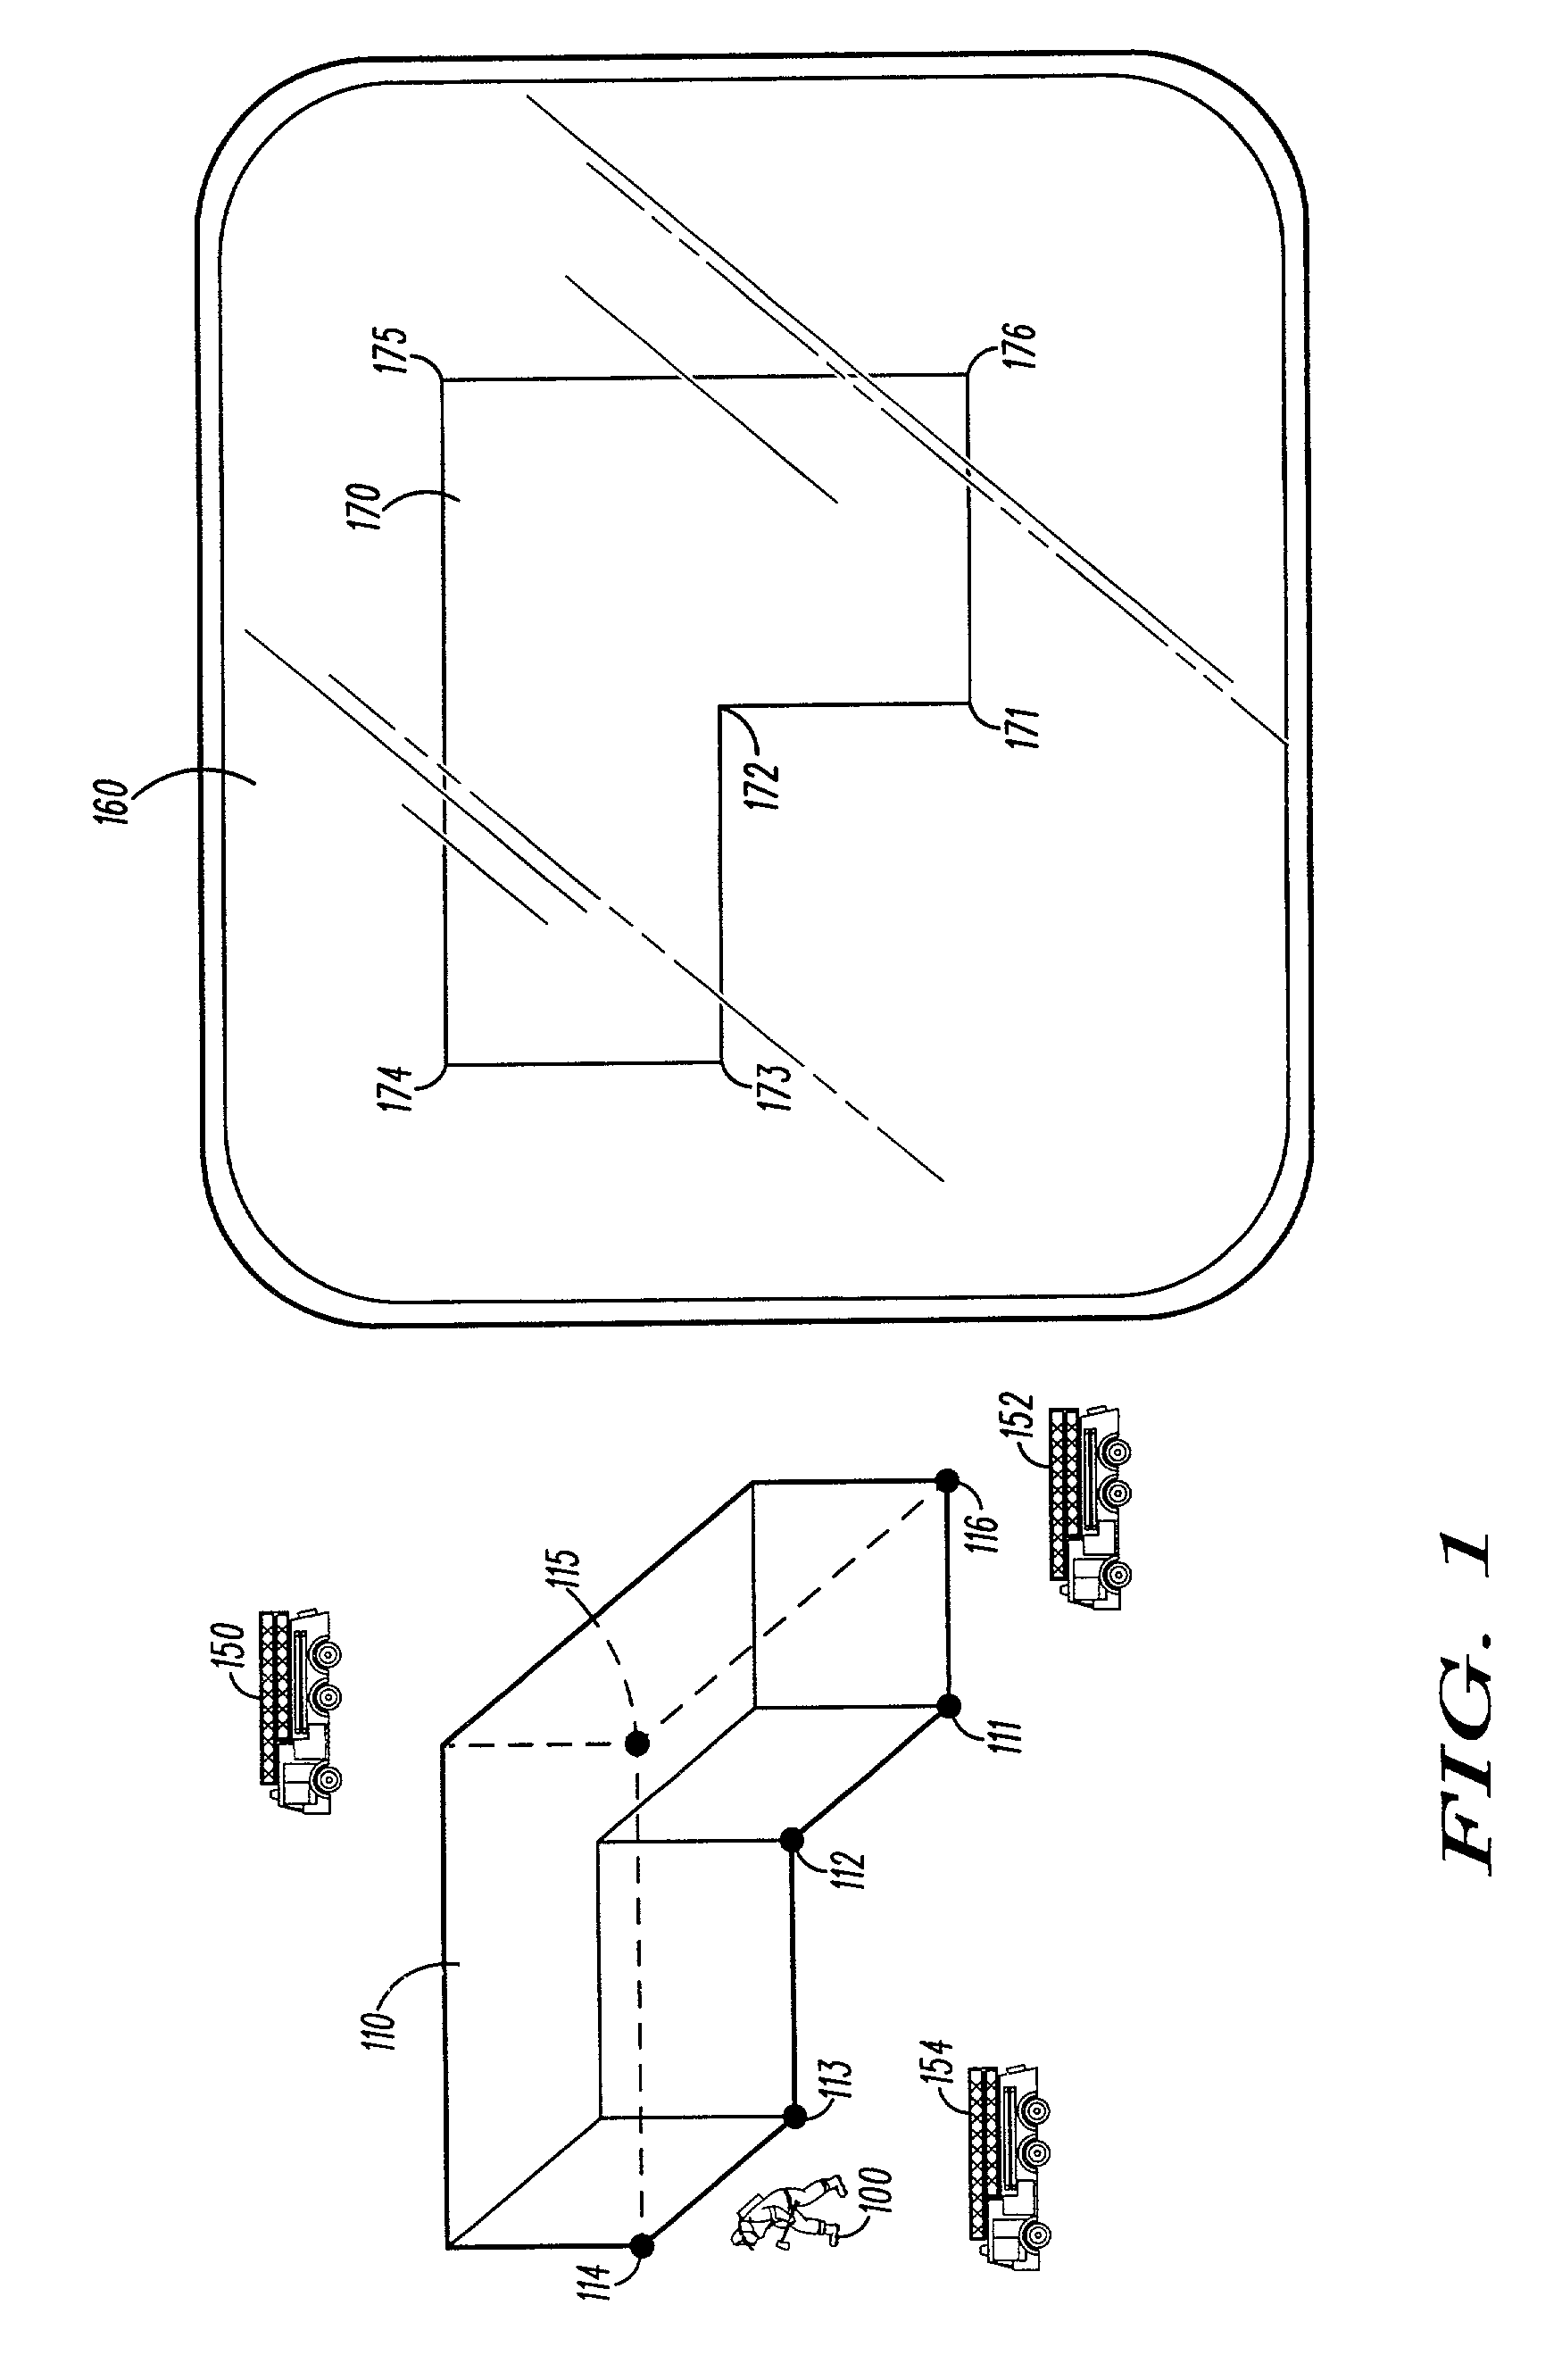 System and method for inferring an electronic rendering of an environment